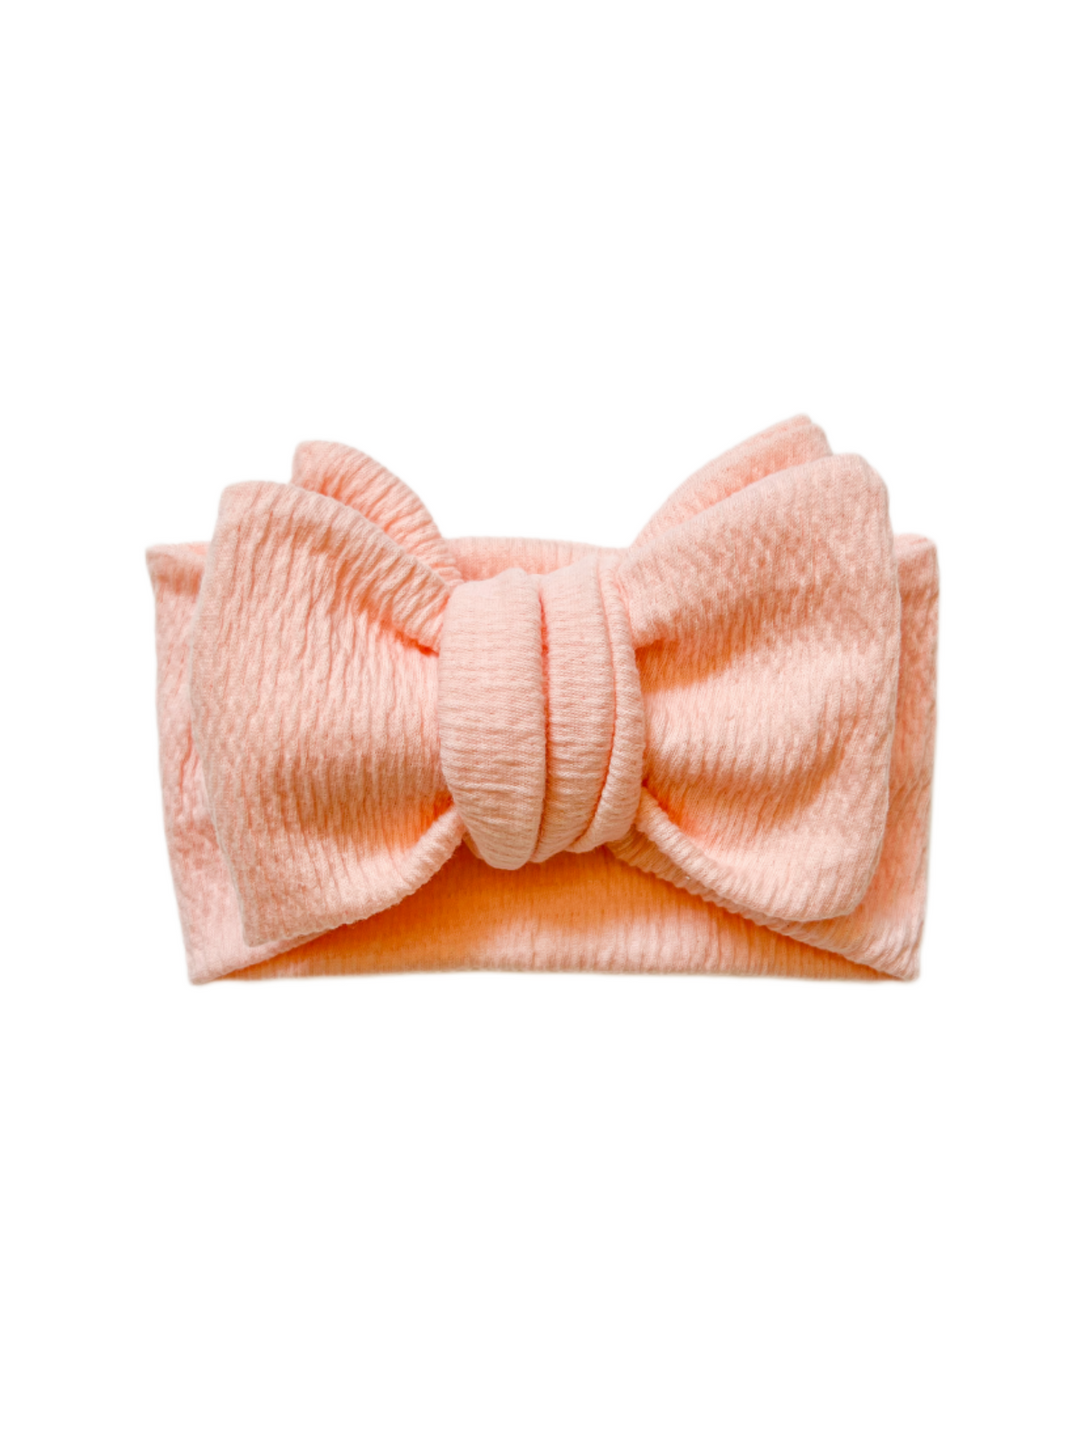 Oversized Crinkle Knit Bow - Peach